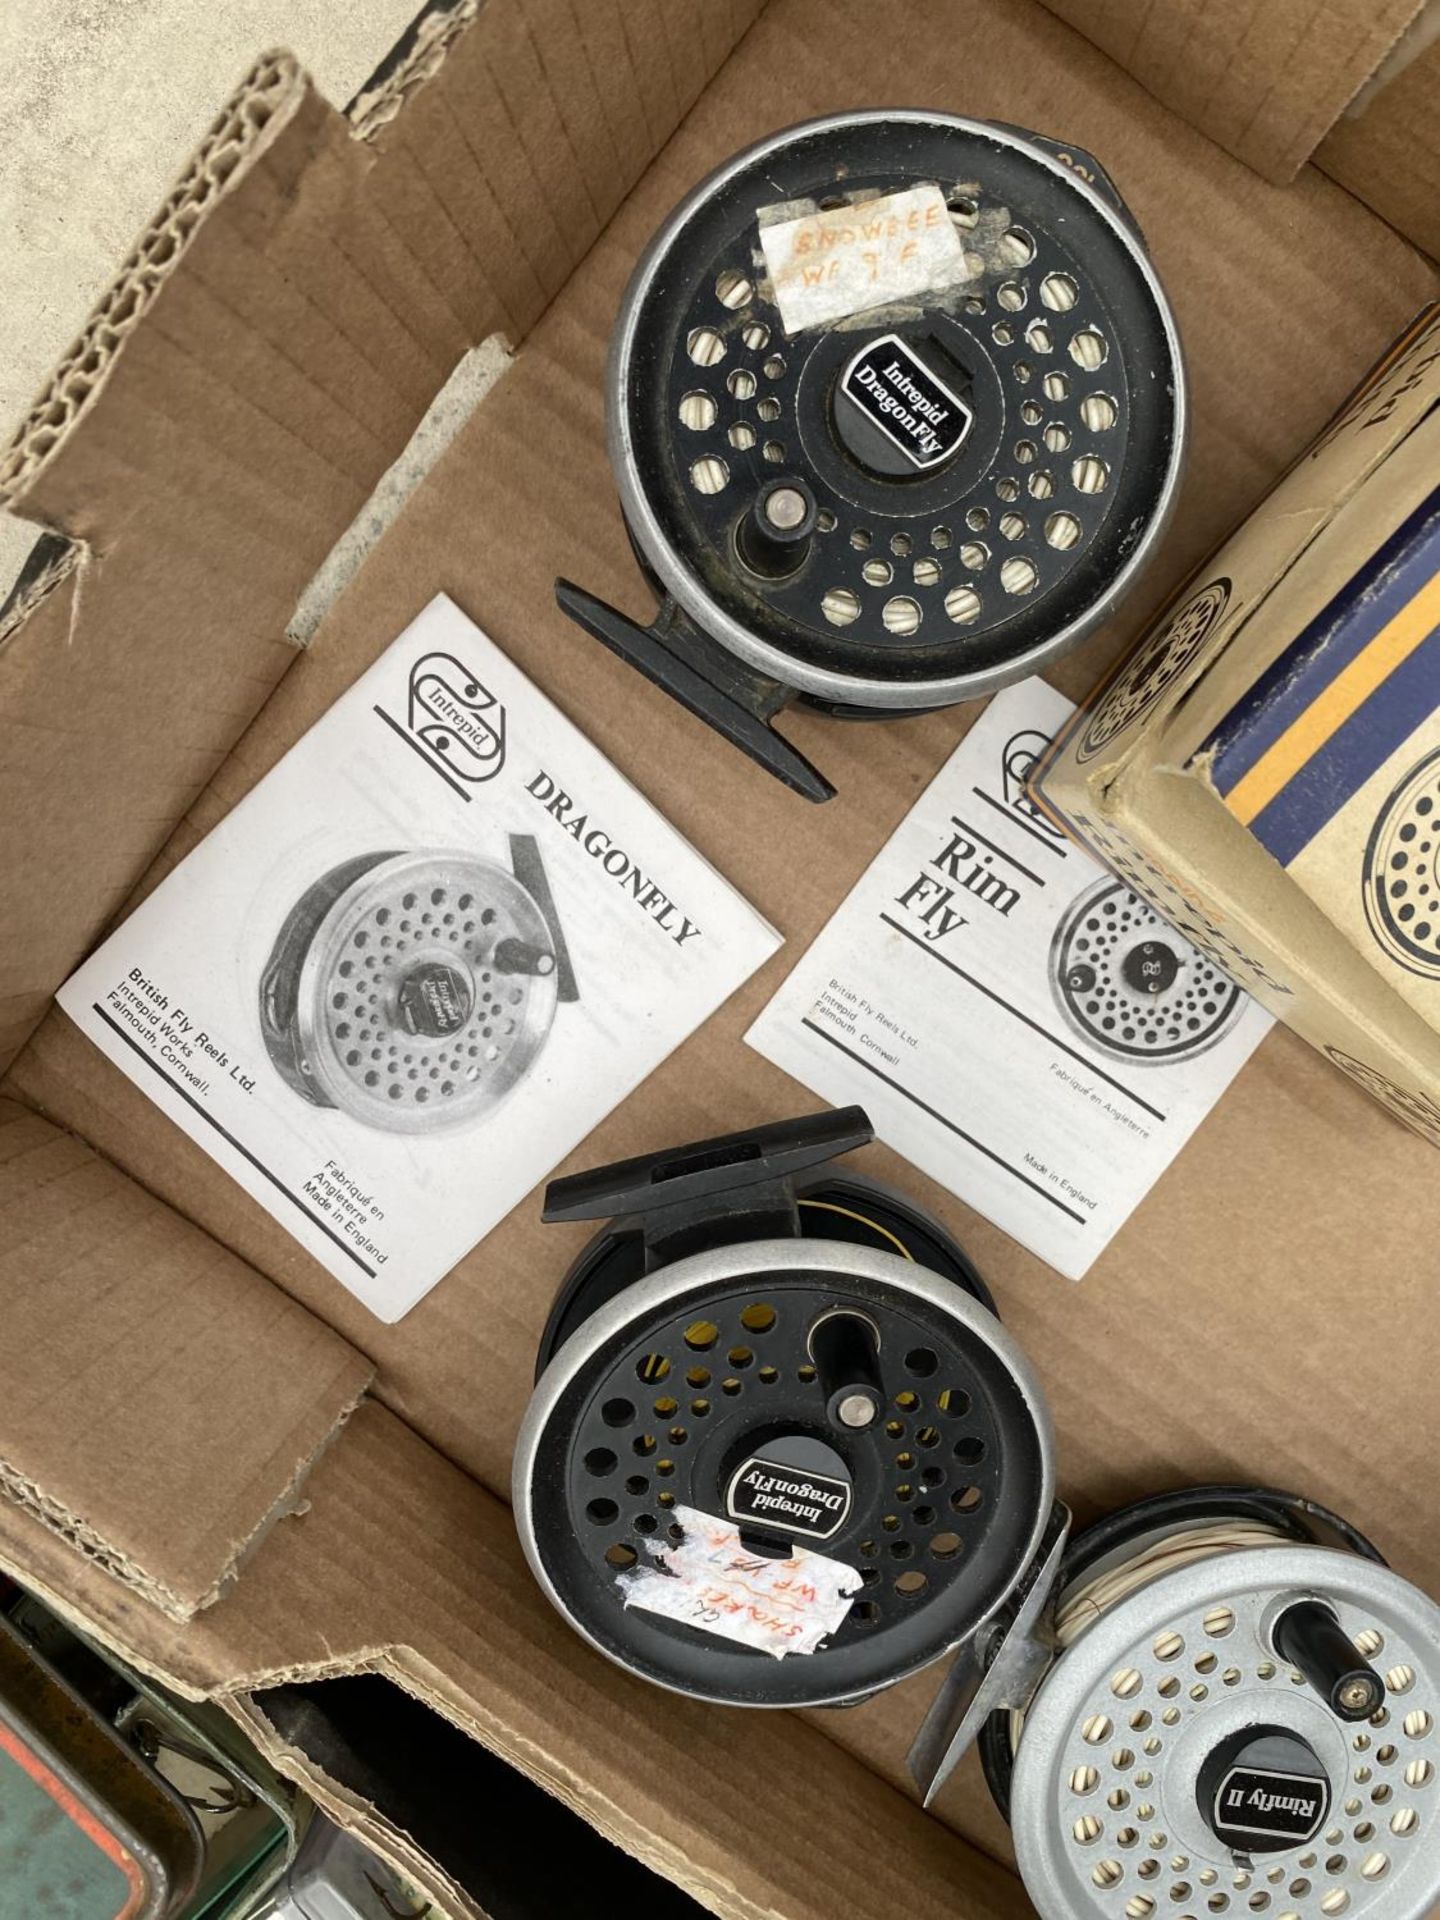 TWO DRAGONFLY FLY FISHING REELS, A REGULAR RIMFLY REEL AND A KINGSIZE RIMFLY REEL AND SPARE SPOOL - Image 4 of 5